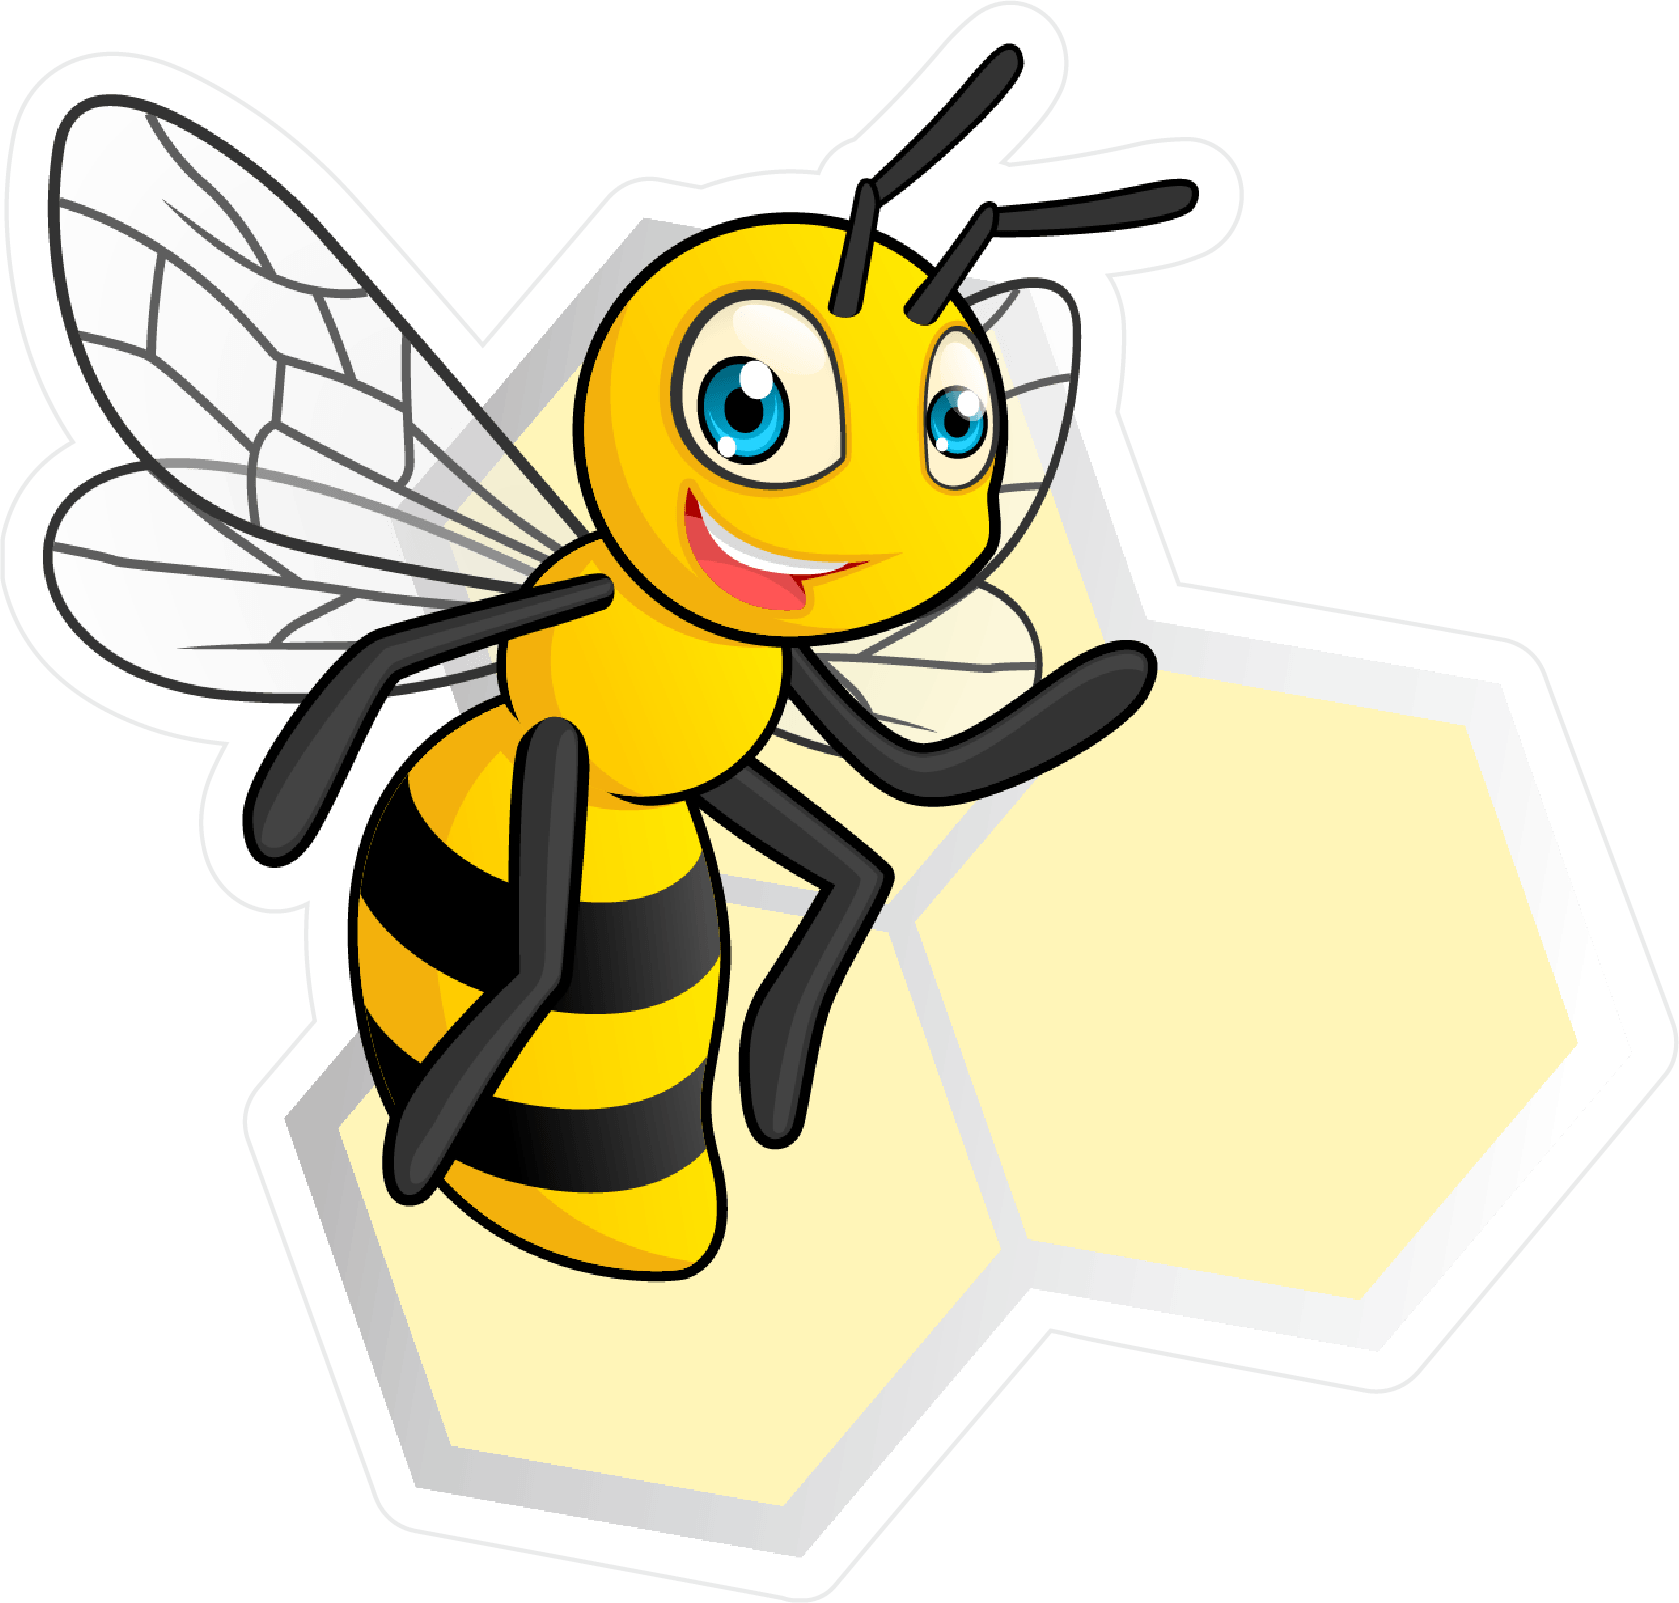 Boxing Bee Logo - Logo Decal in 2018 | Products | Pinterest | Bee, Bee boxes and Bee ...